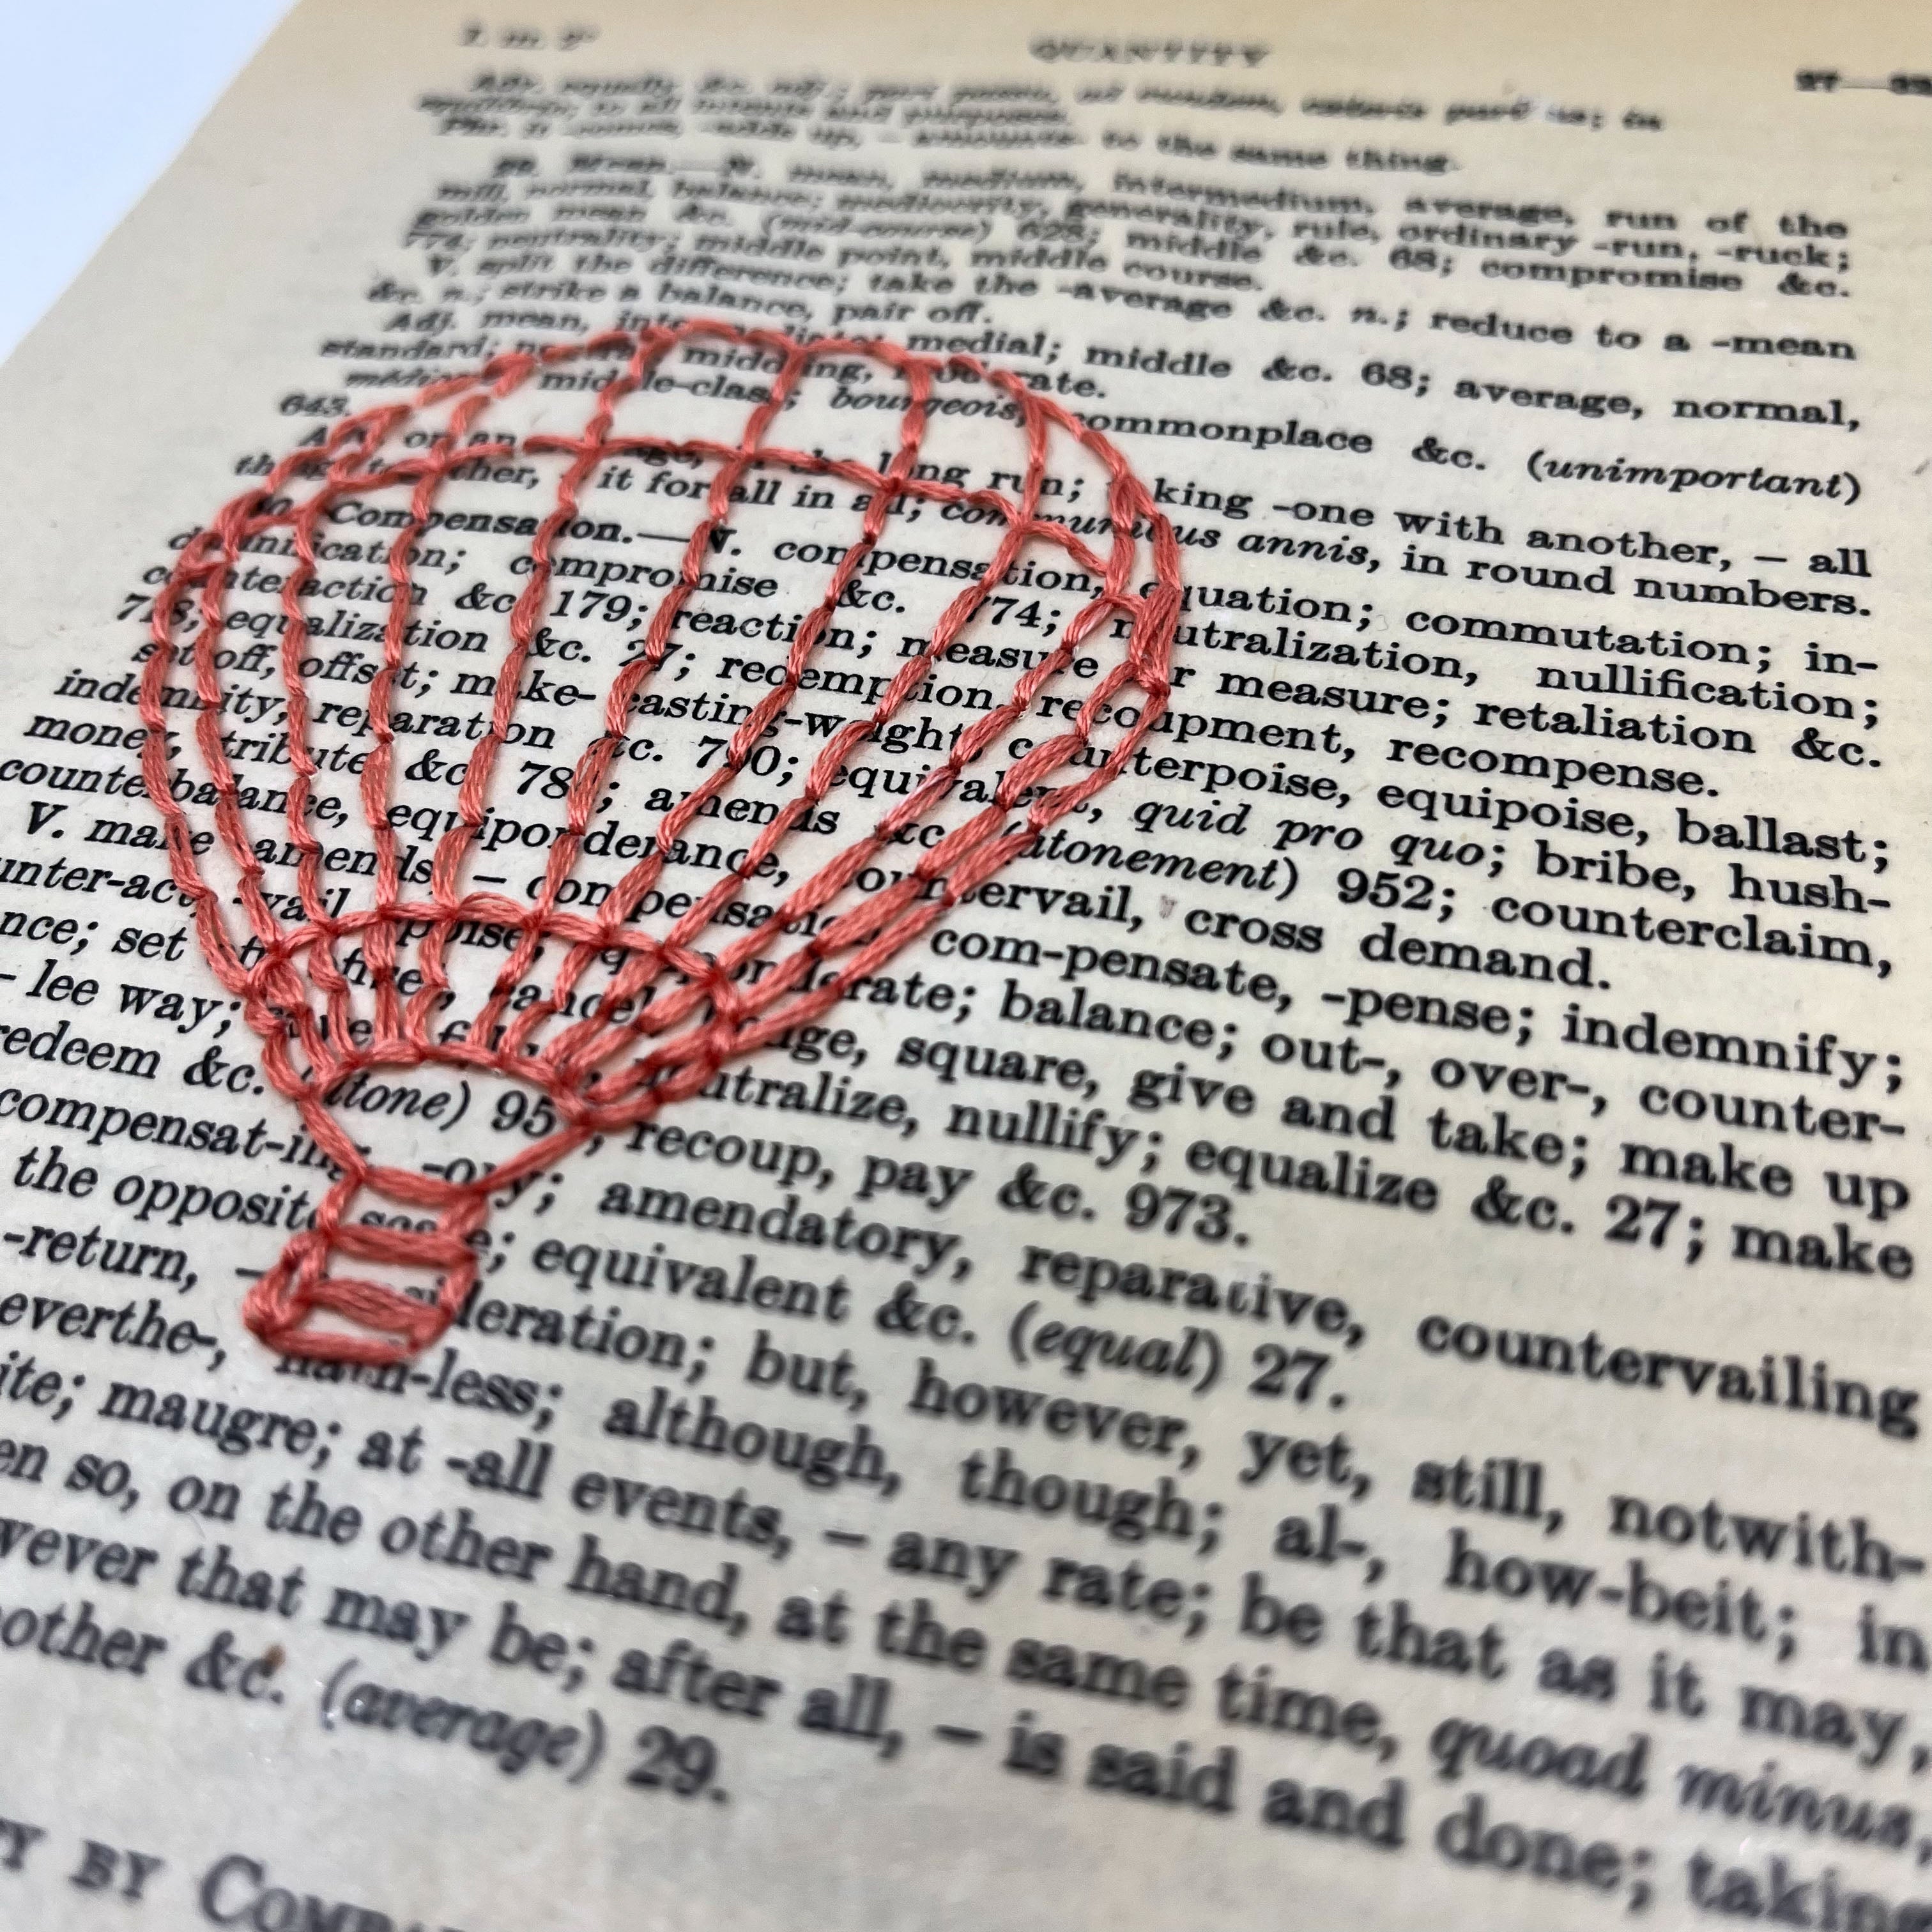 Wall Hanging- Vintage Book Page with Hand Embroidered Hot Air Balloon